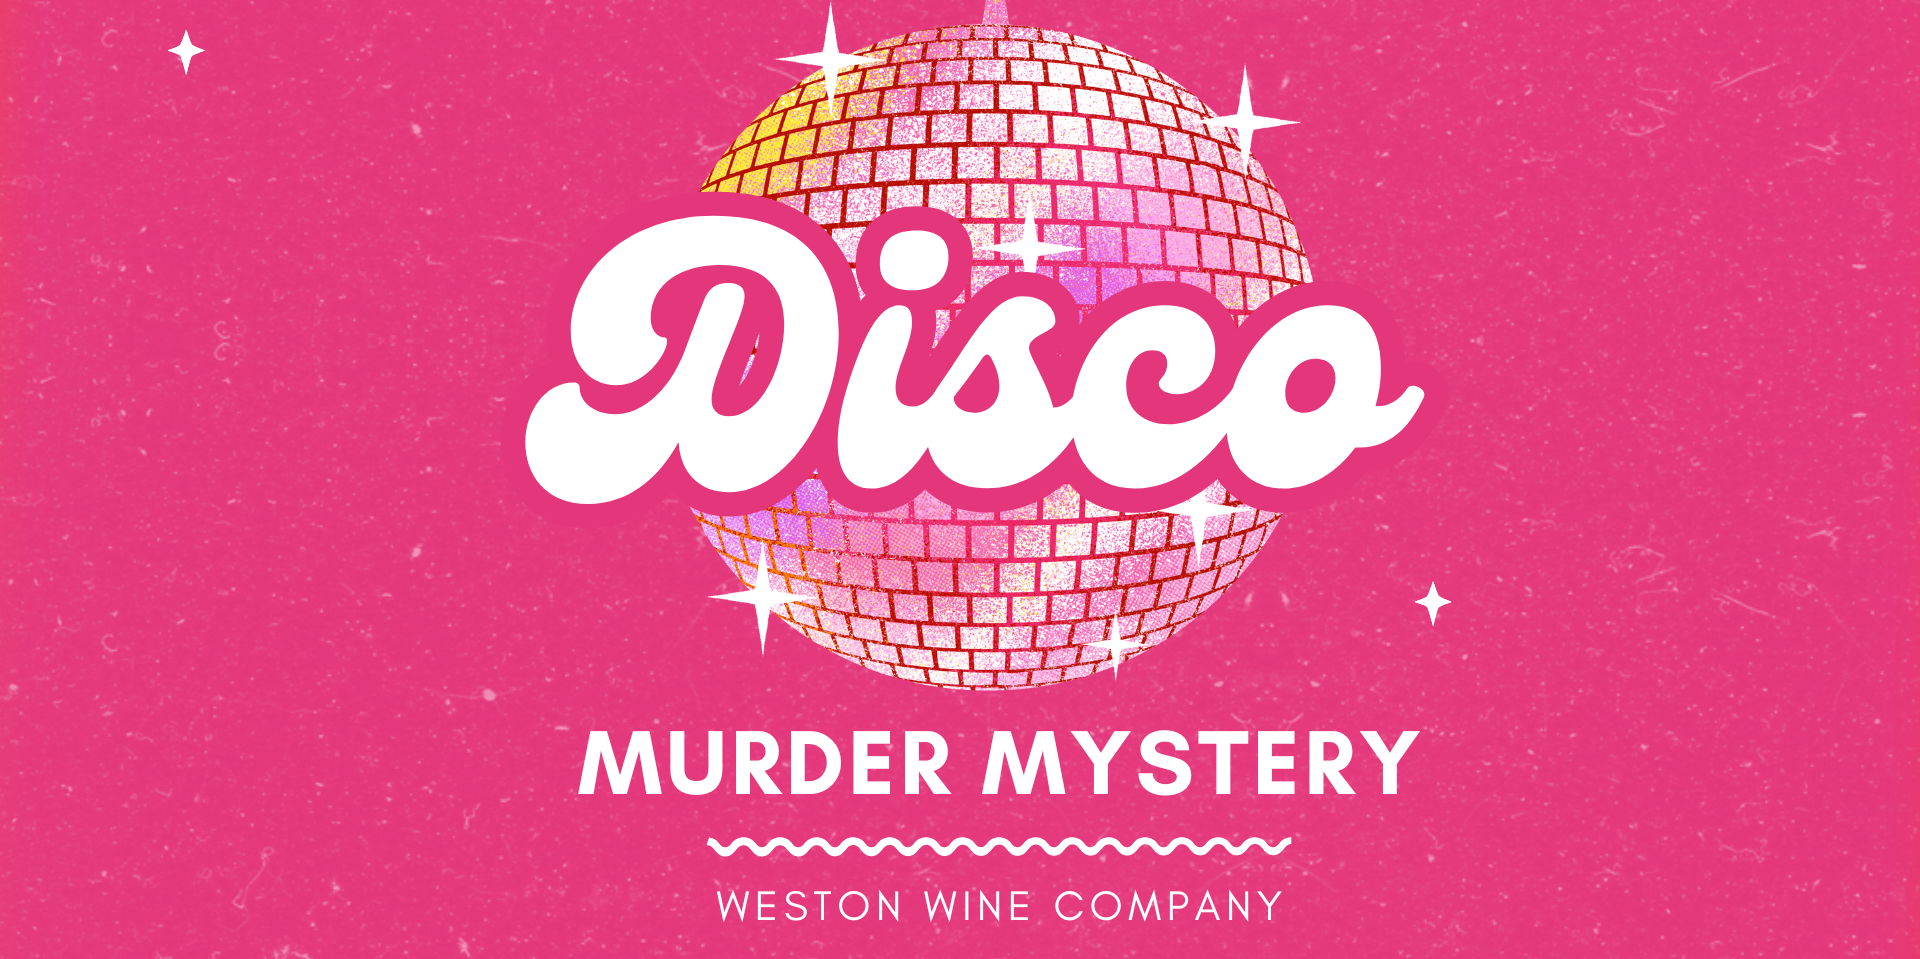 Disco Murder Mystery Party promotional image